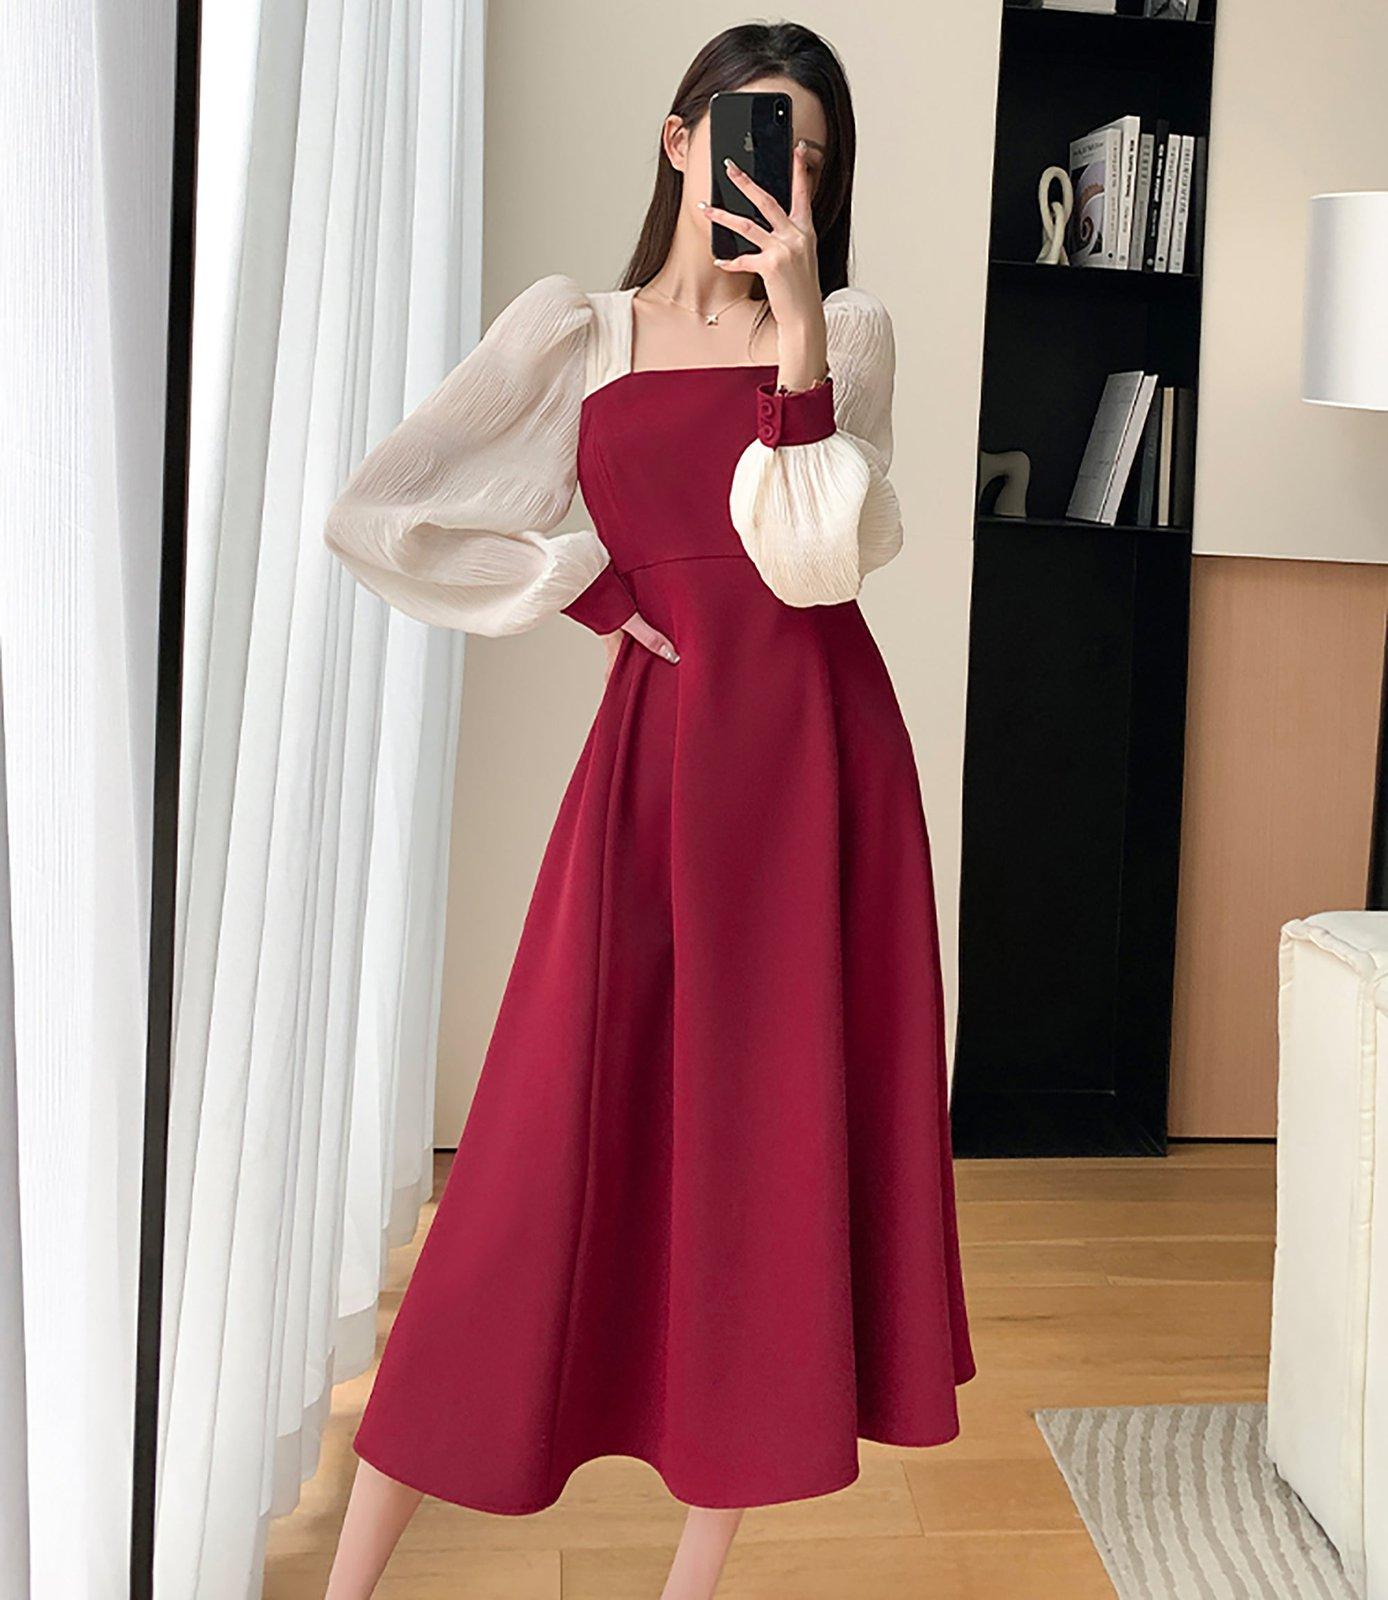 Patchwork Chiffon Sleeve Fit & Flare Red Dress Vivian Seven